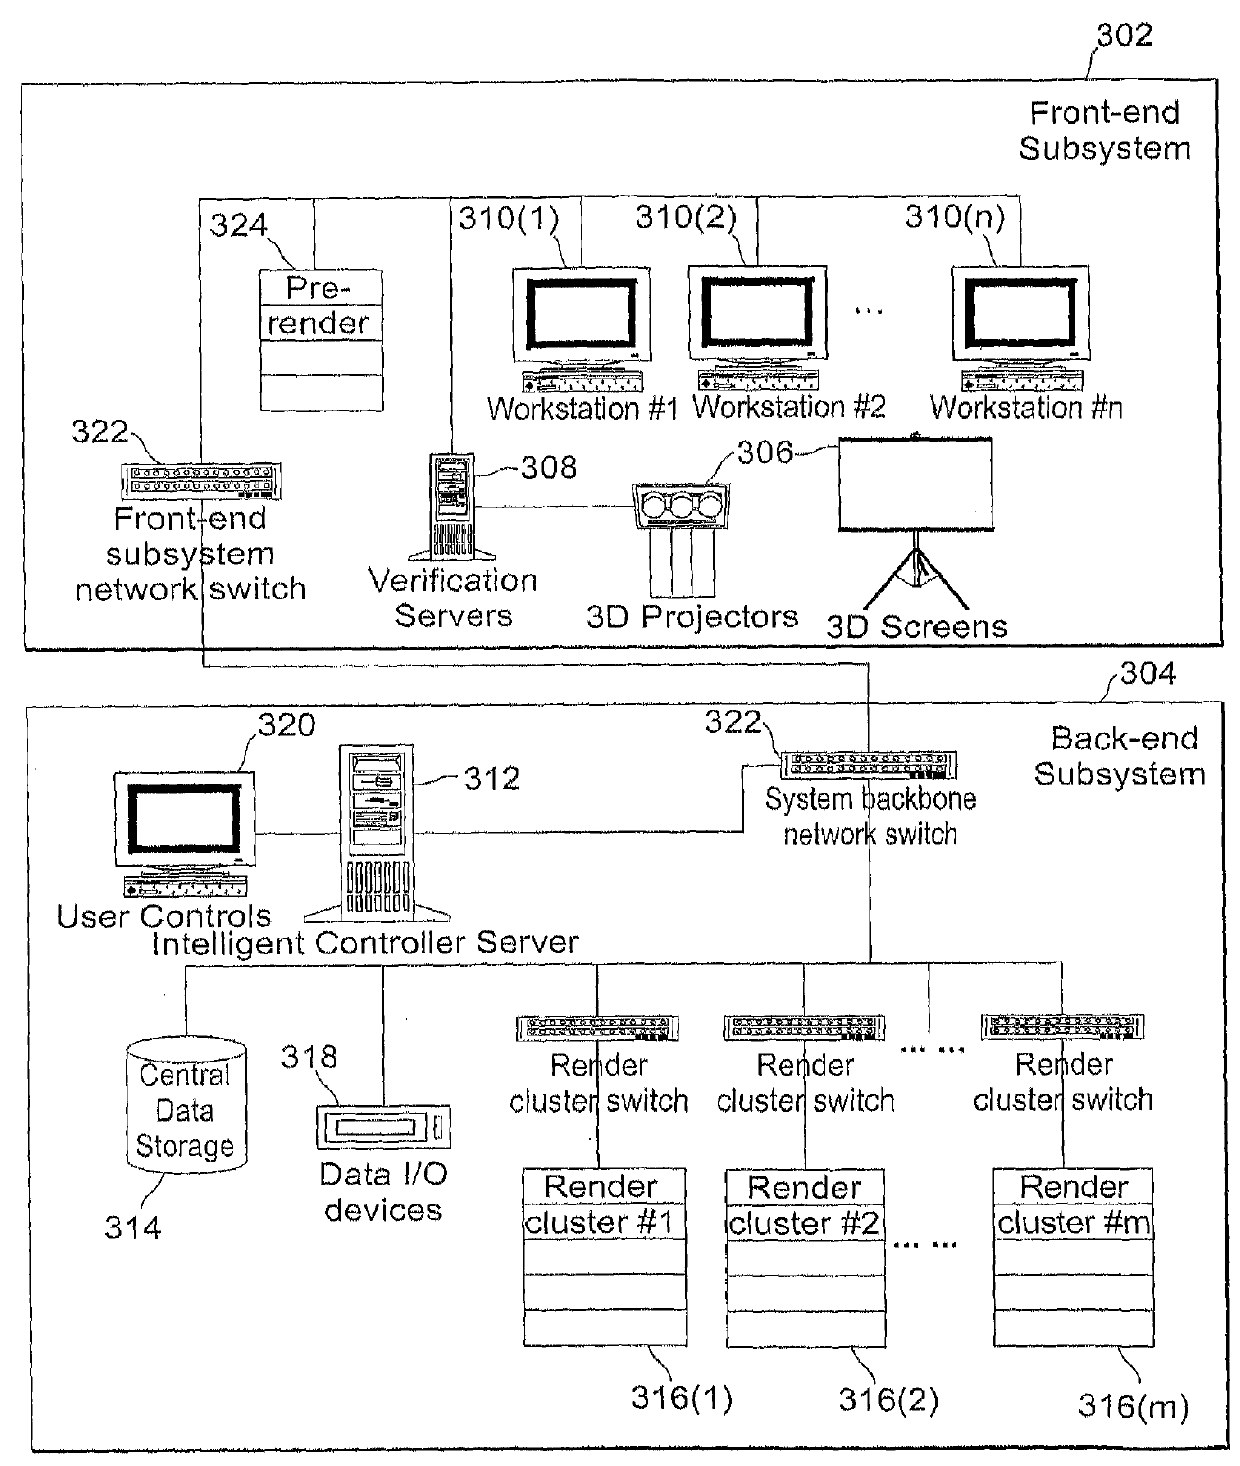 Methods and systems for converting 2D motion pictures for stereoscopic 3D exhibition